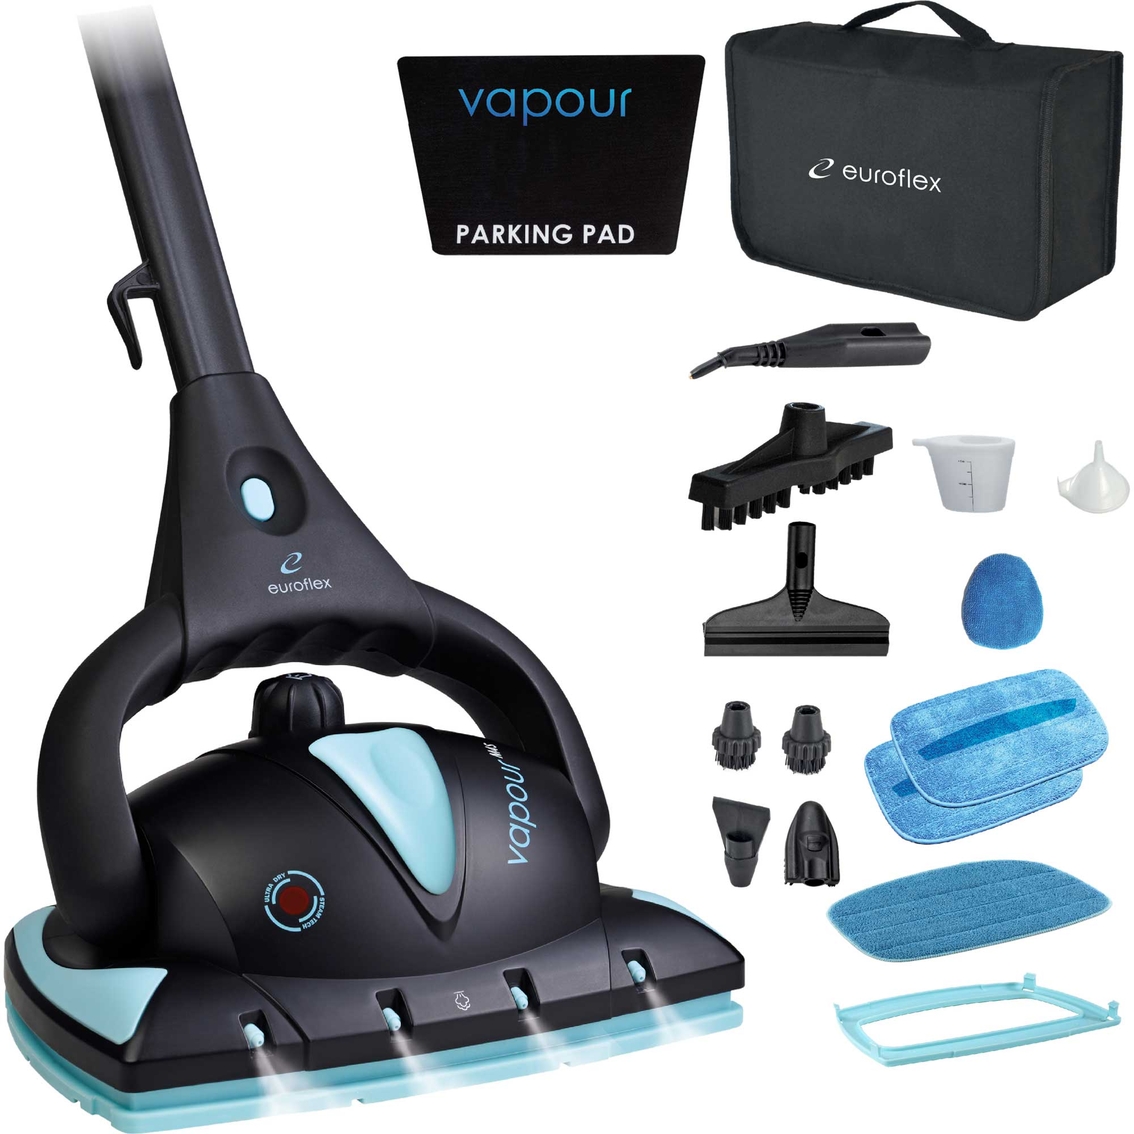 Euroflex Vapour M4S Upright Floor and Surface Steam Cleaner - Image 3 of 6